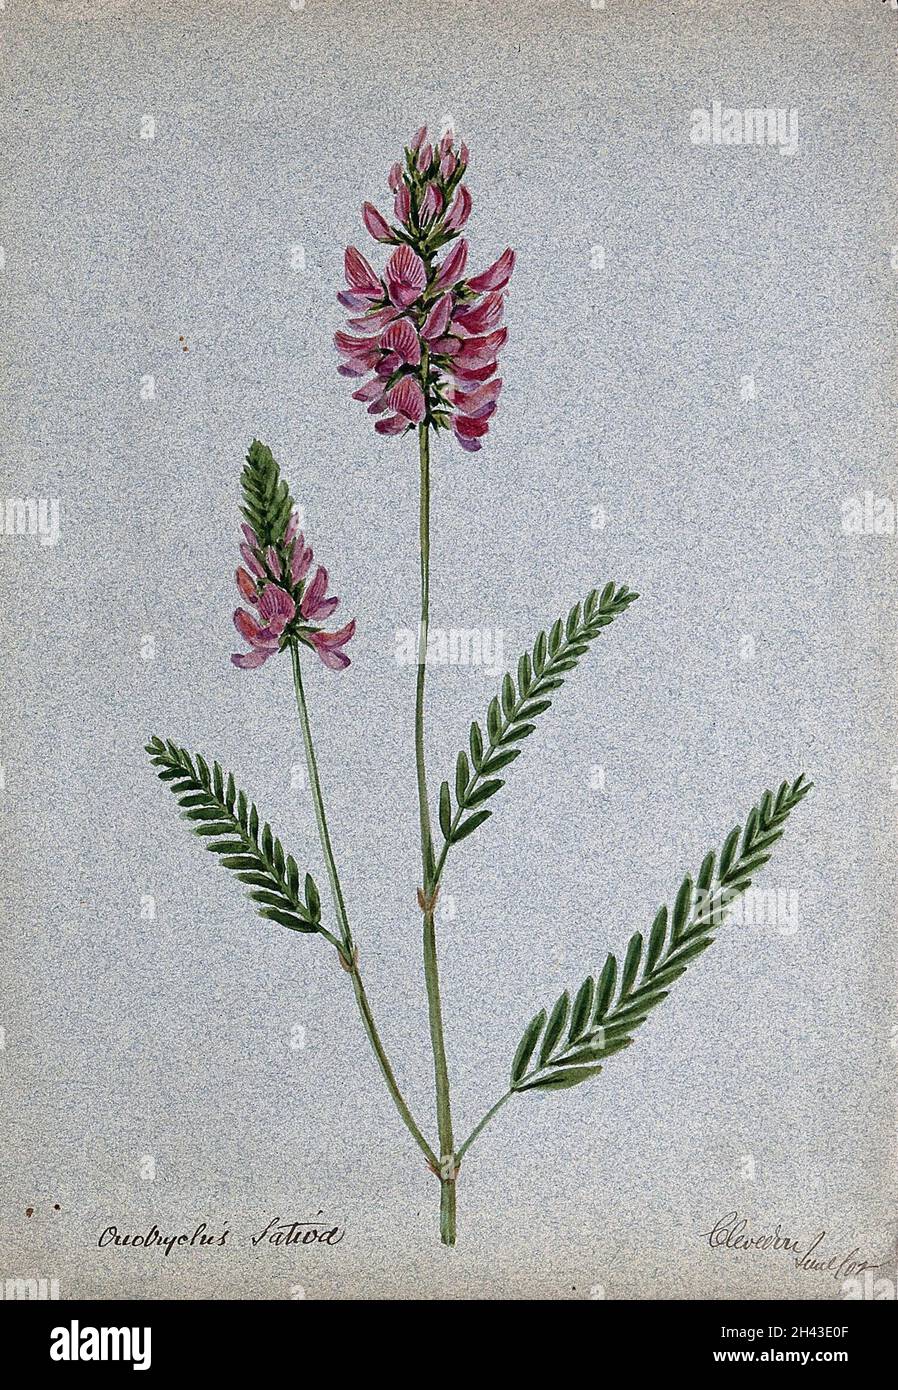 A plant (Onobrychis sativa) related to holy clover): flowering stem. Watercolour, 1902. Stock Photo